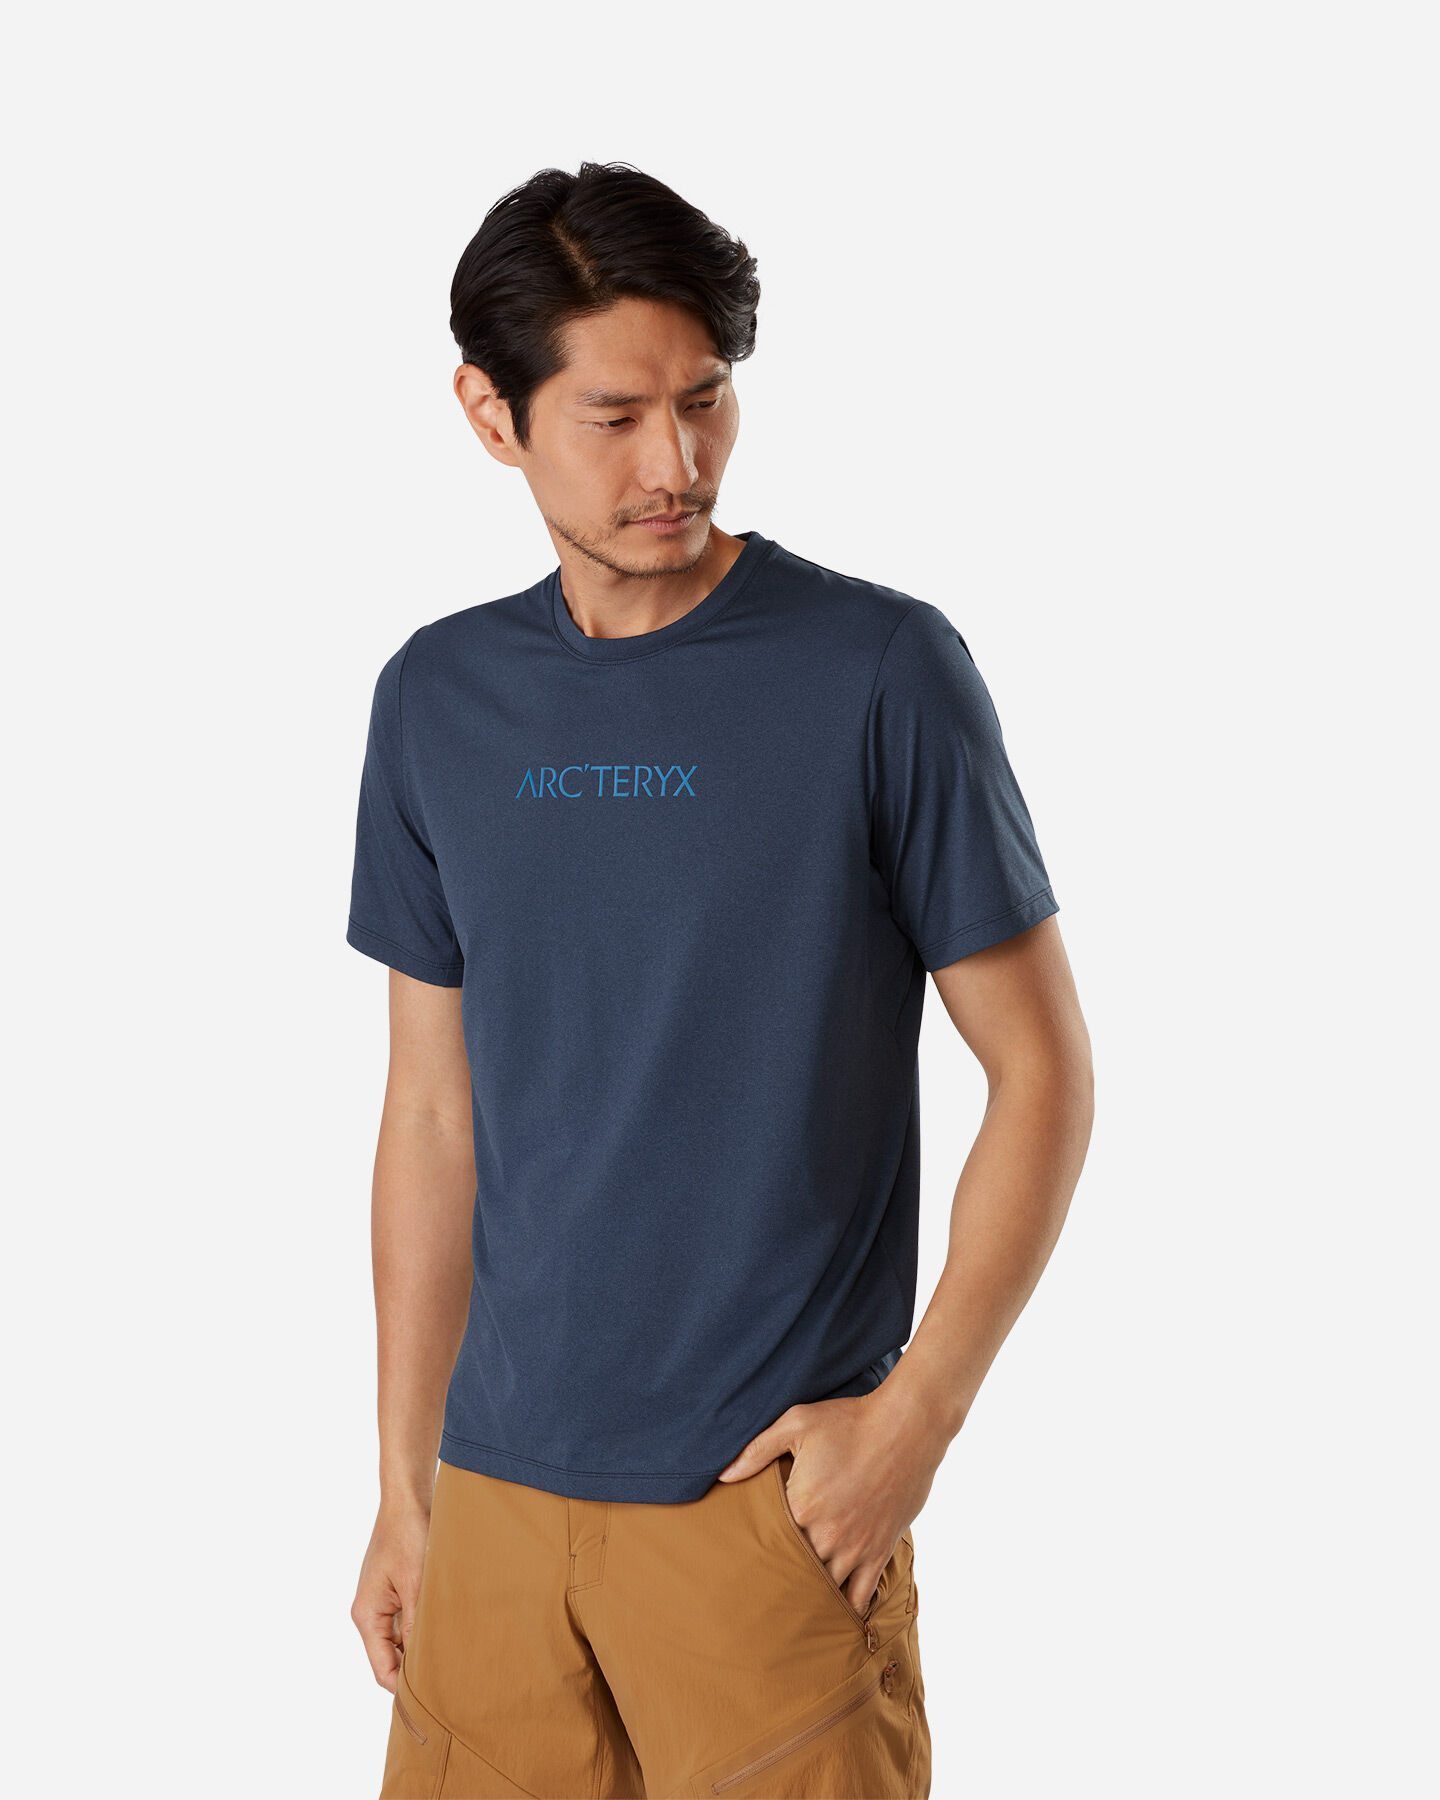  T-Shirt ARC'TERYX REMIGE WORD M S4075197|1|S scatto 1